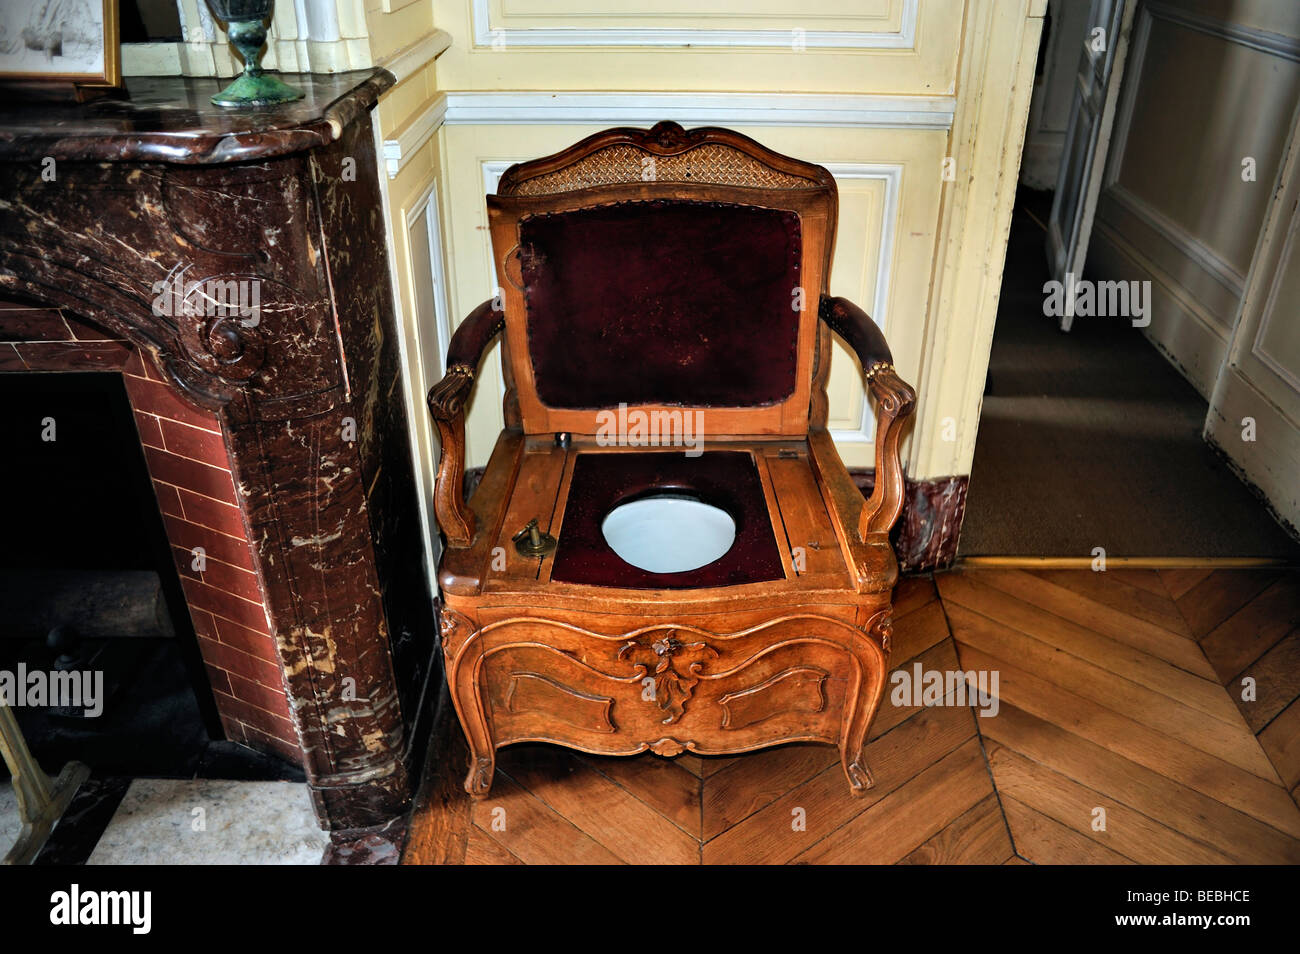 Paris, France - Antique Furniture inside French Monuments, 'Chateau de Breteuil', Old Toilet Chair in Bedroom Stock Photo